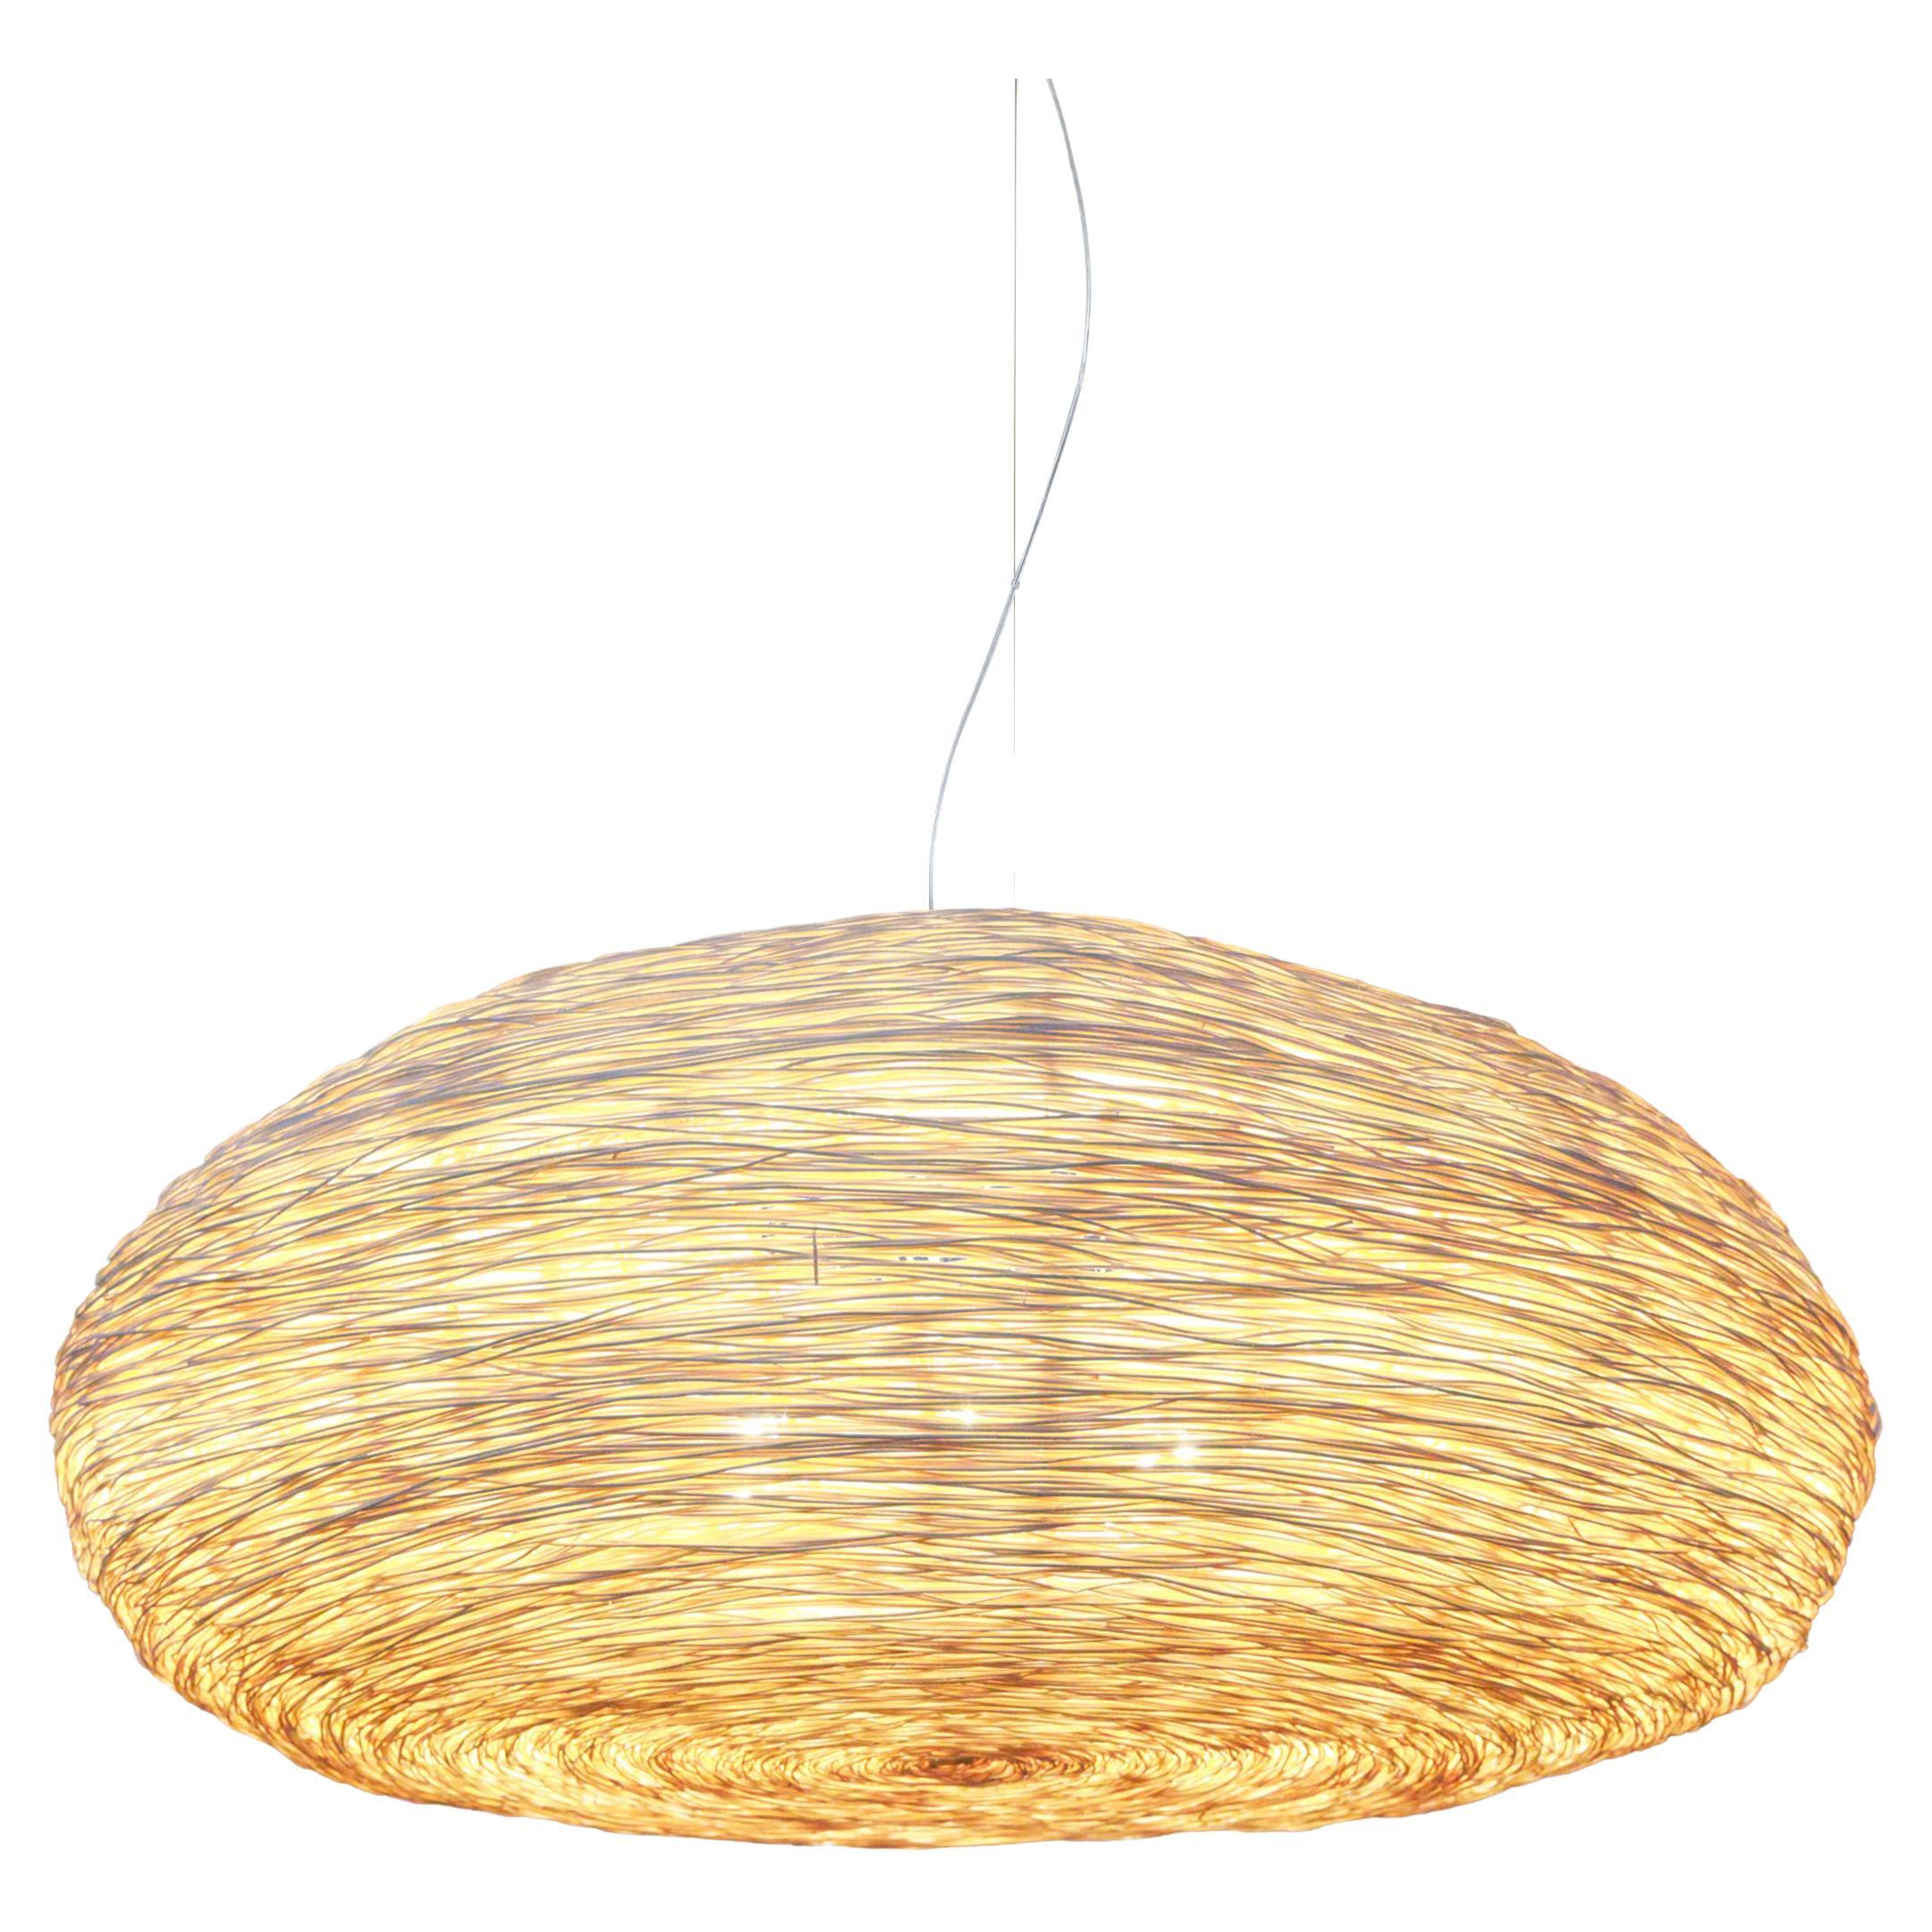 New World Pendant Light by Ango, Unique Rattan Lighting For Sale